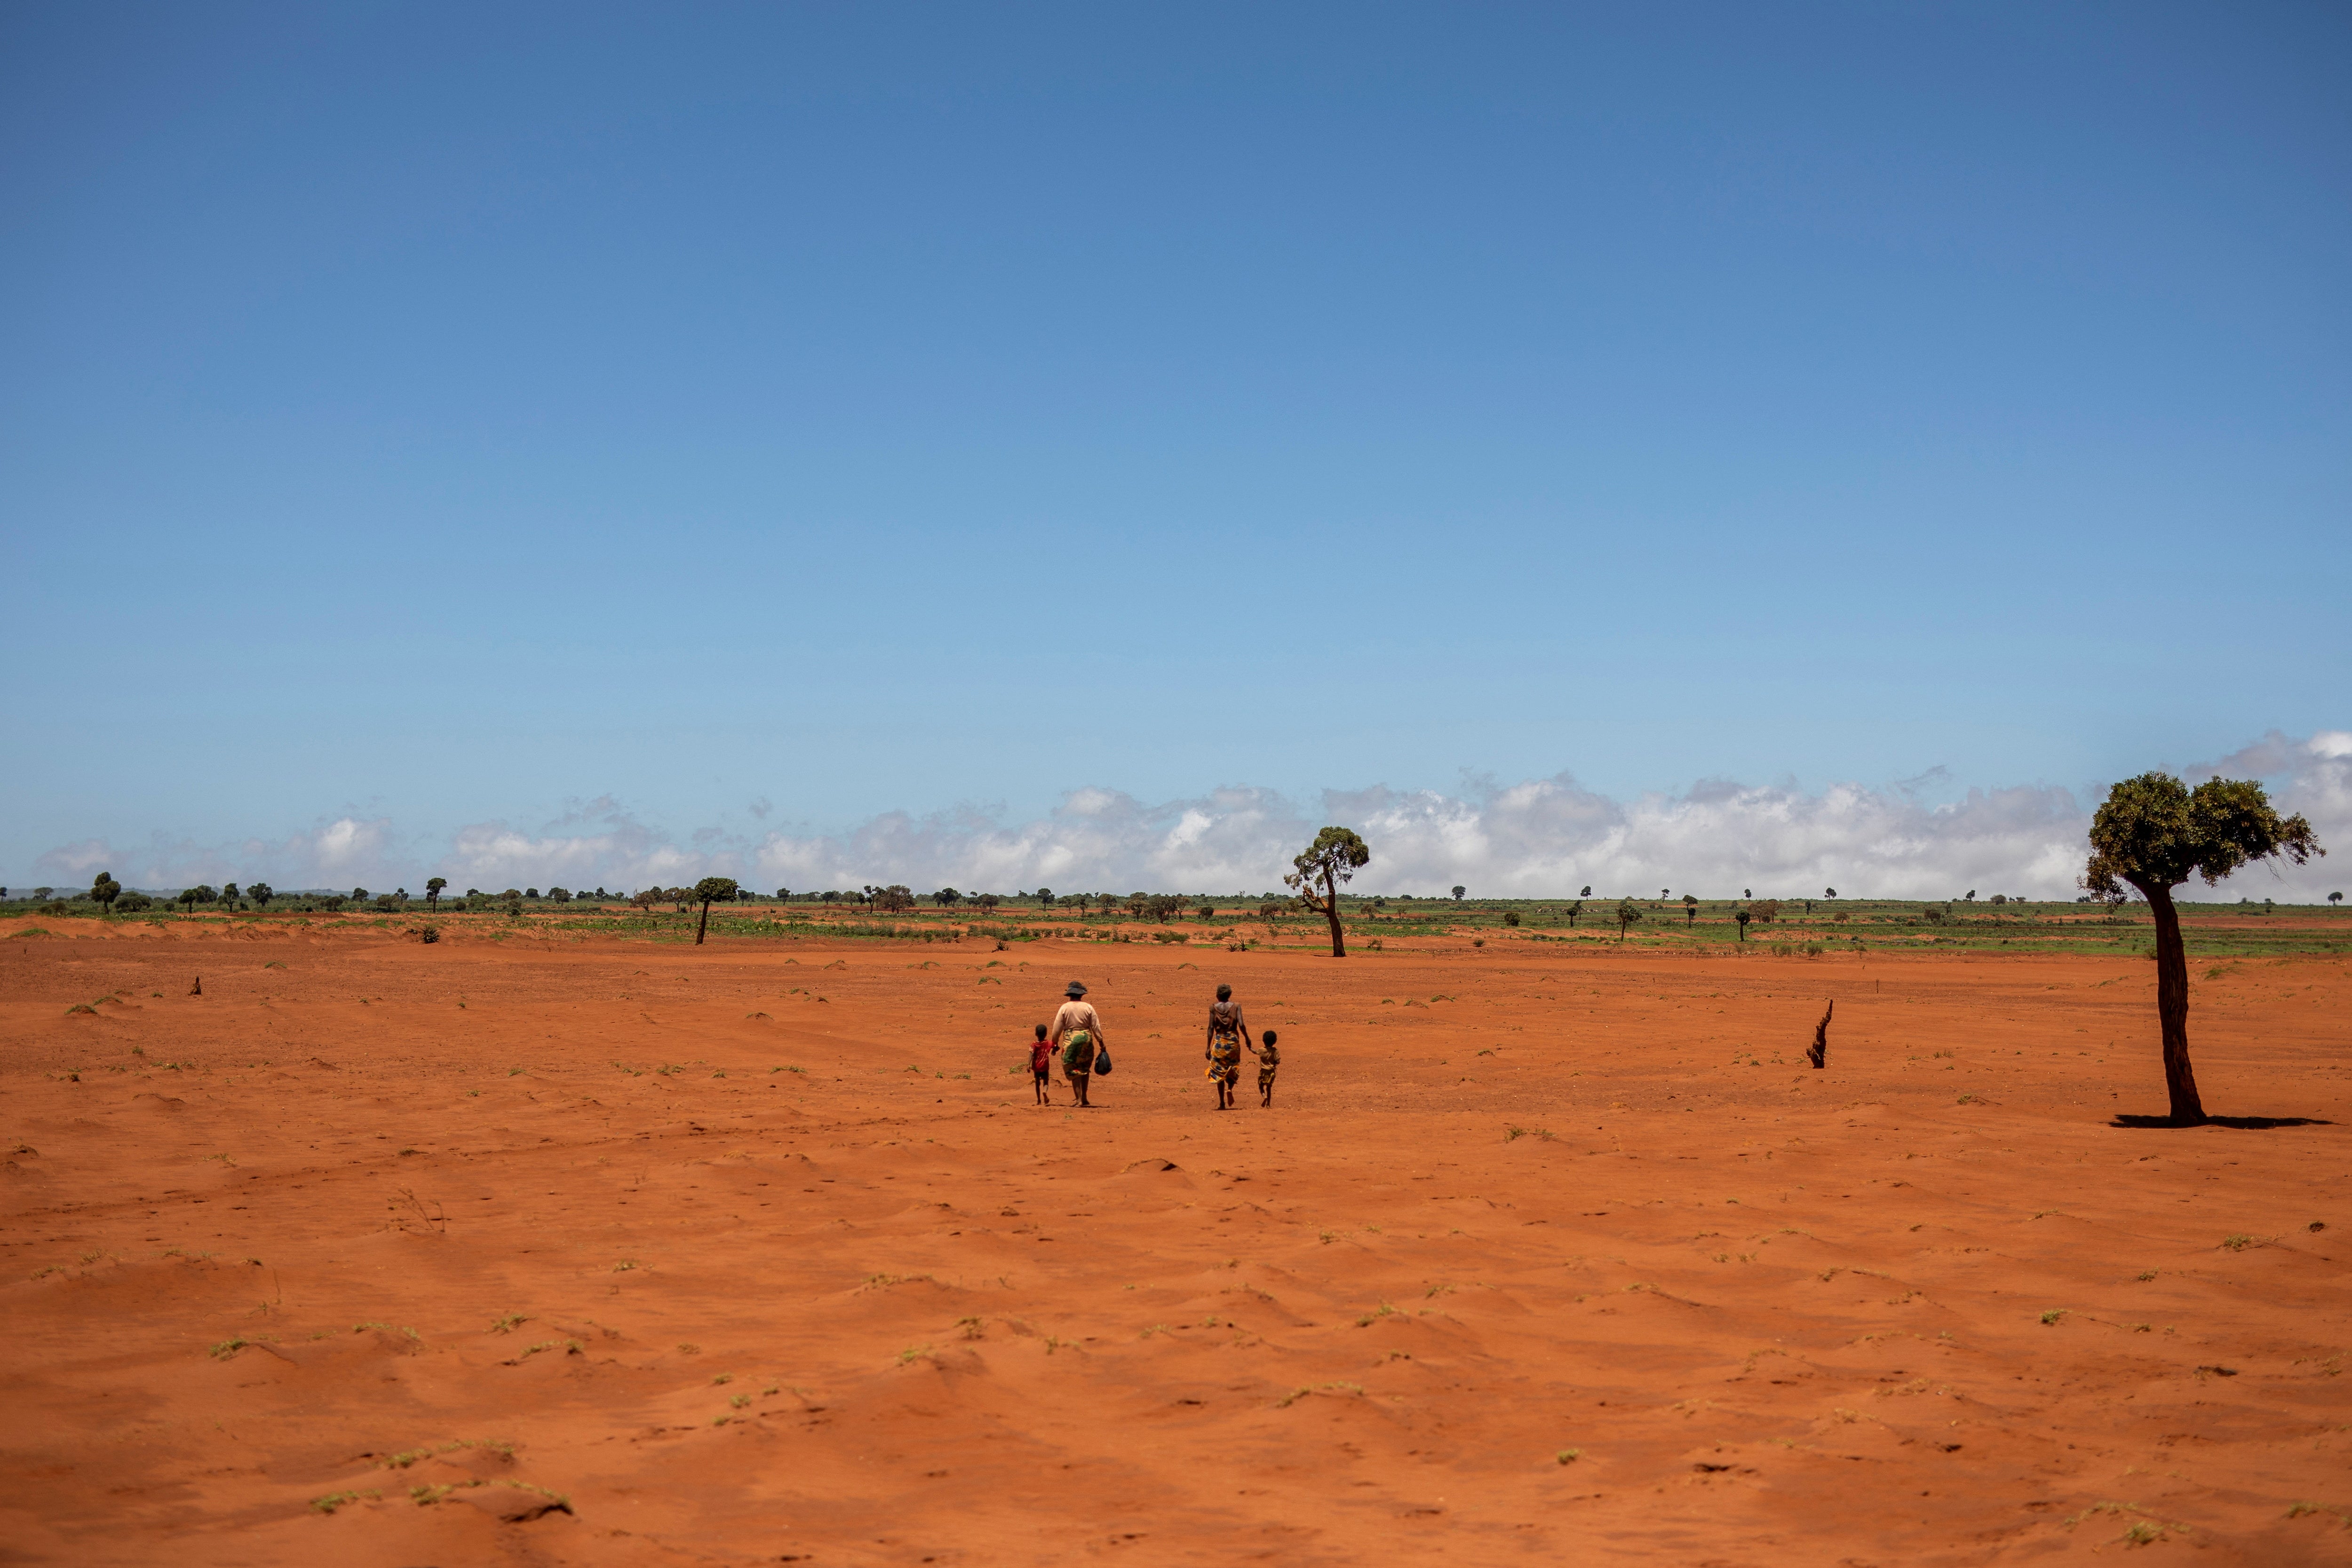 Tarira and her son Avoraza, four, walk through a field covered with red sand